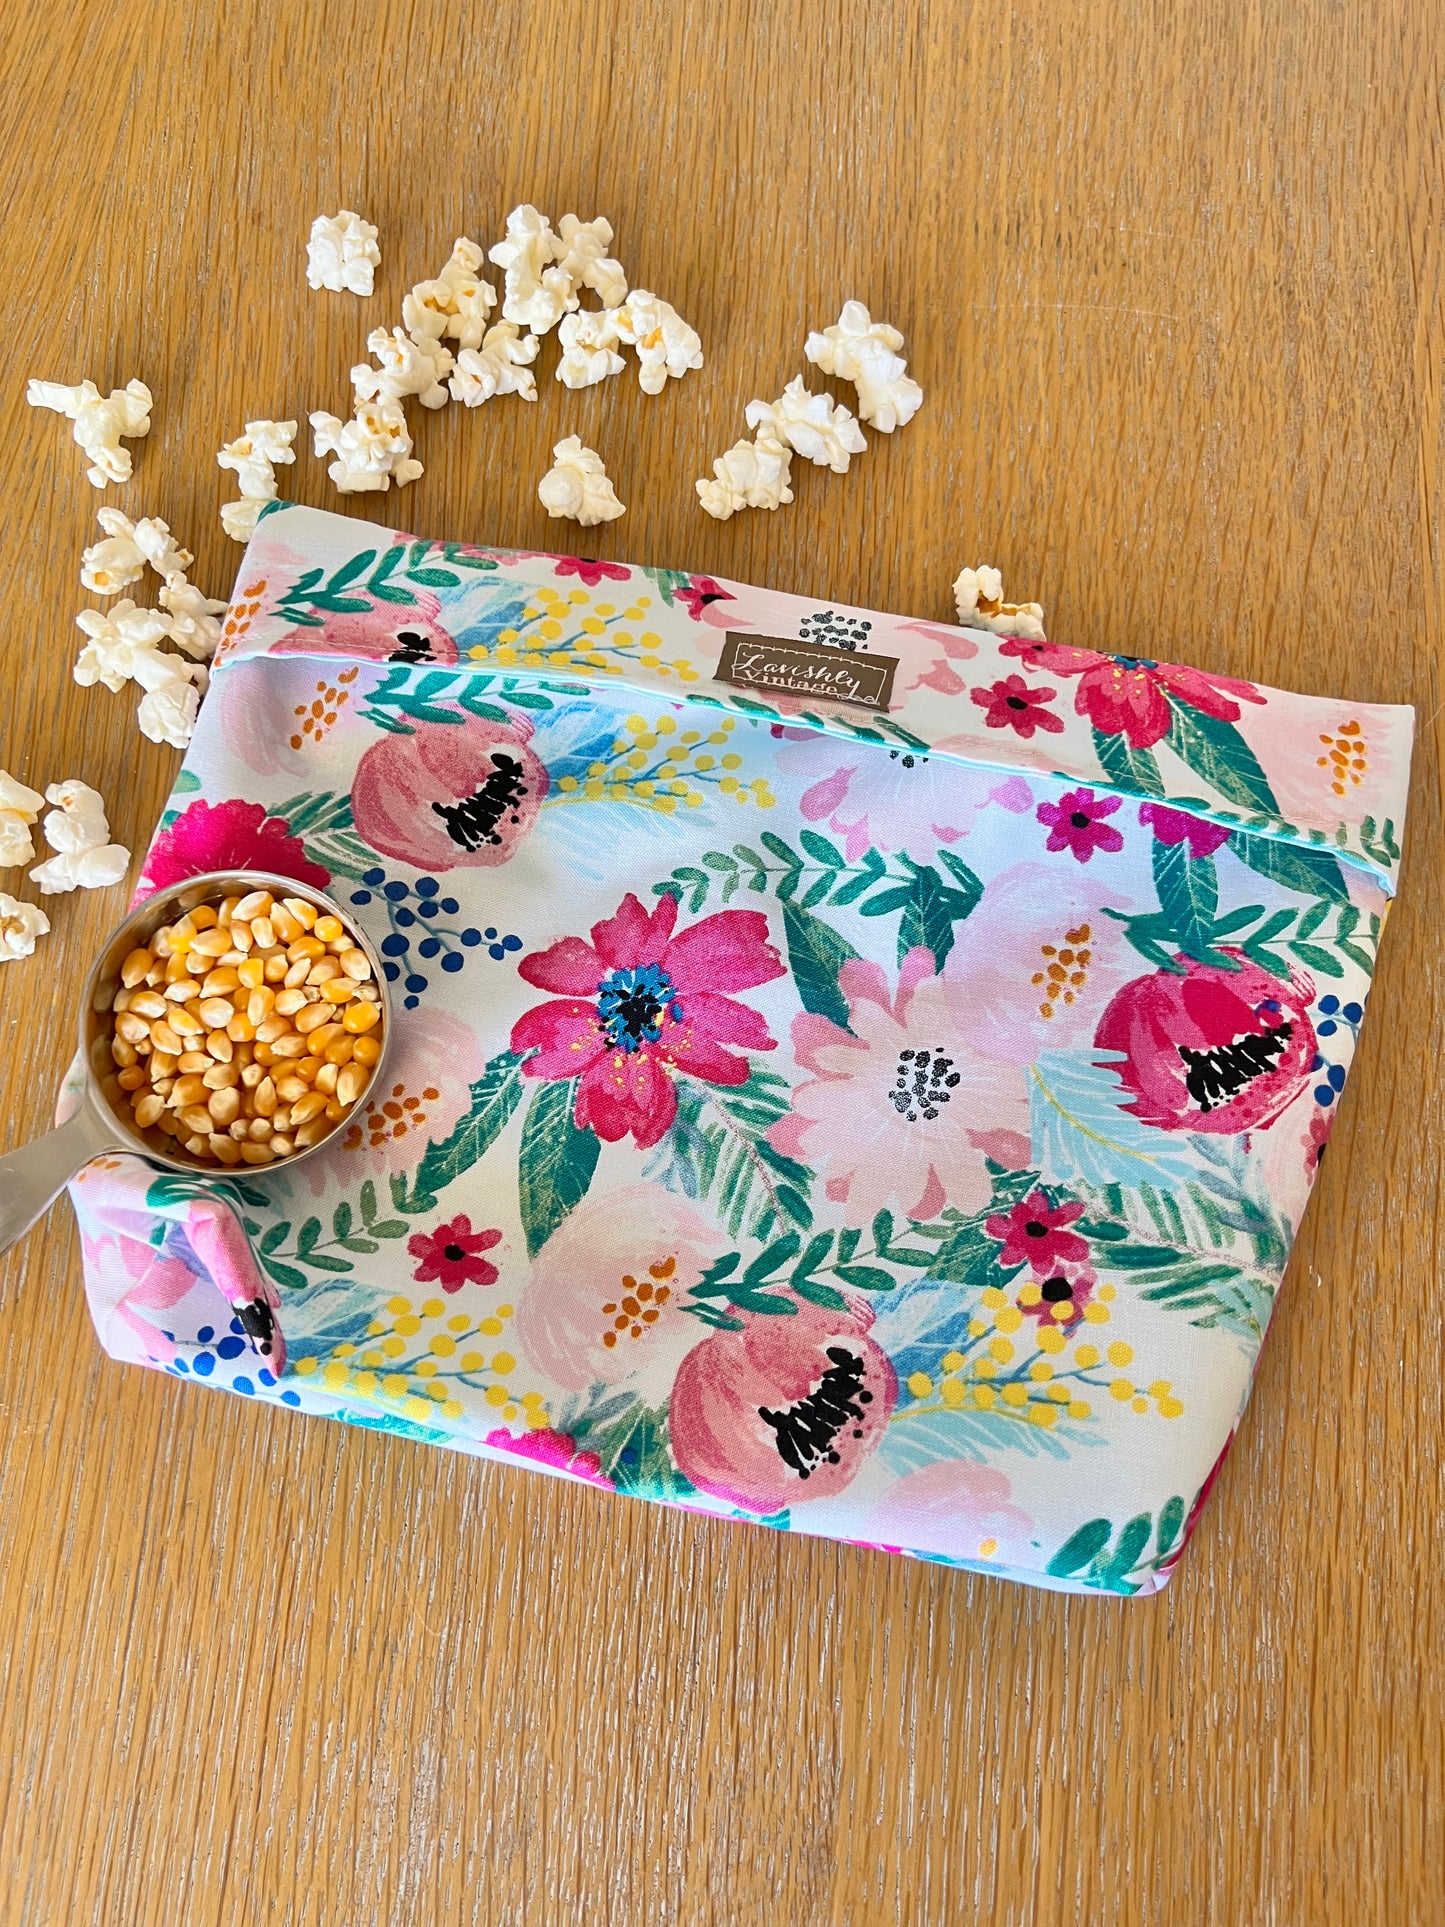 Floral and Berry Popcorn Bag